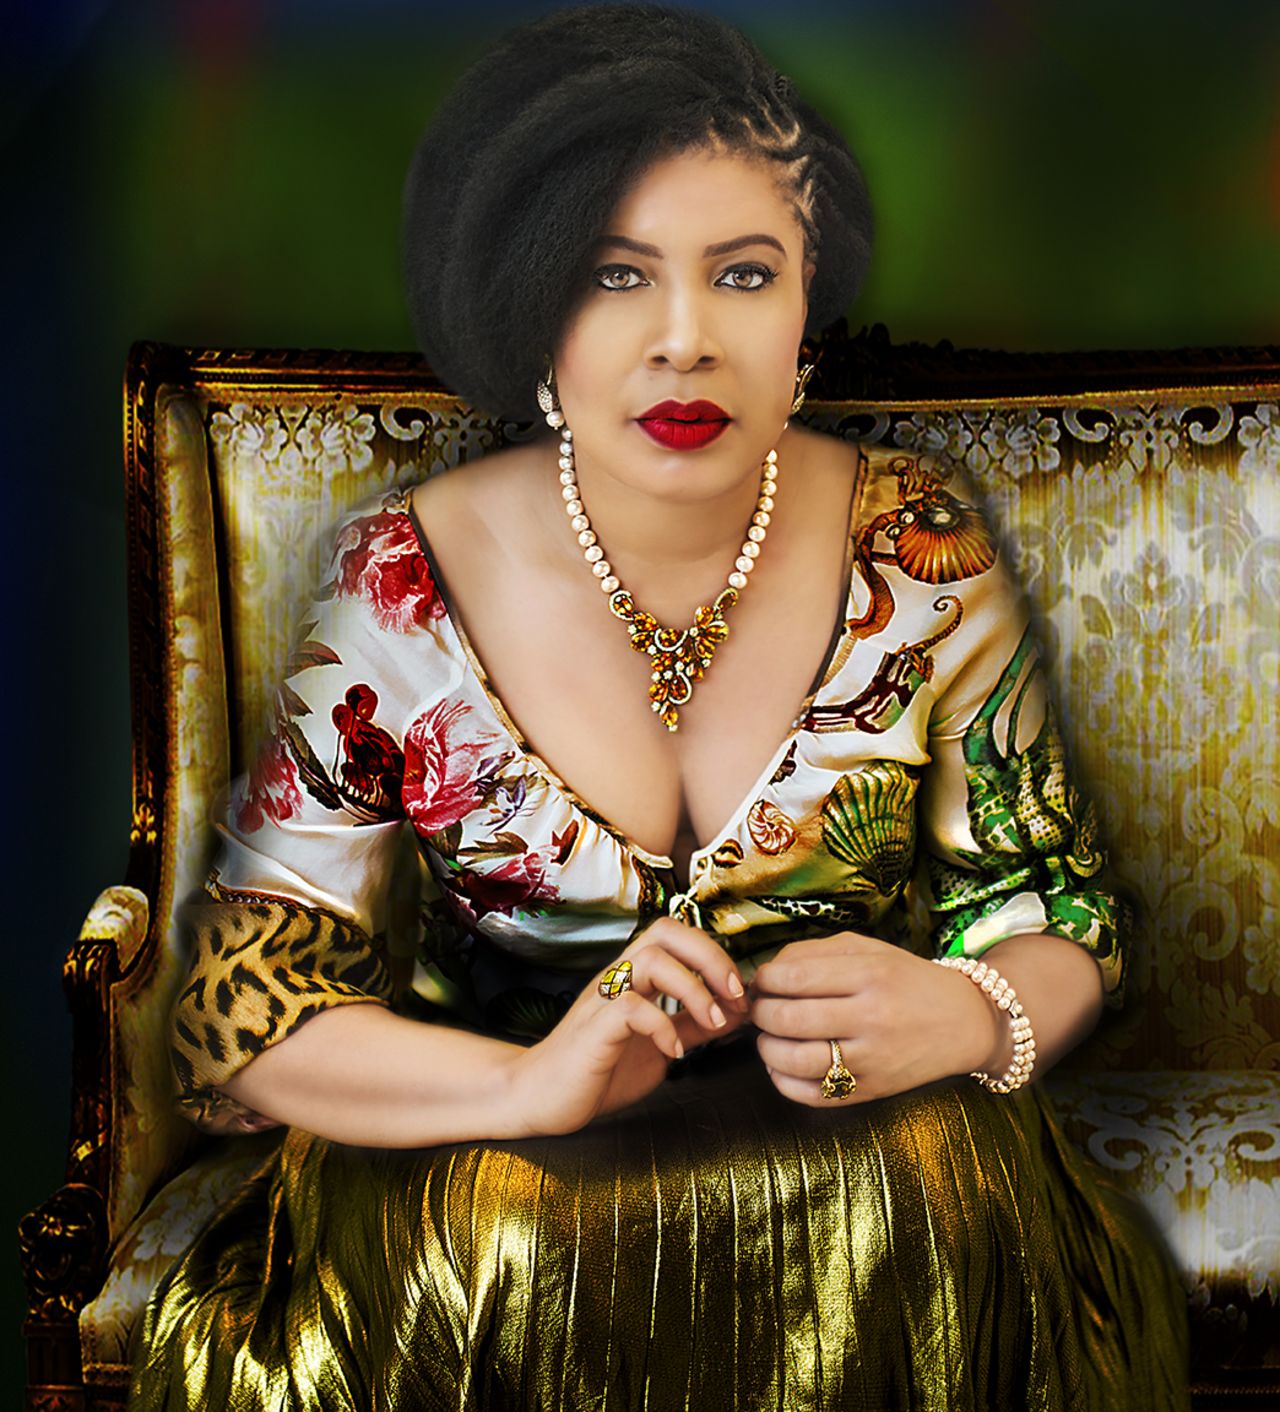 Port-Harcourt born Monalisa Chinda has starred in over 150 movies since her first major film in 1996. 